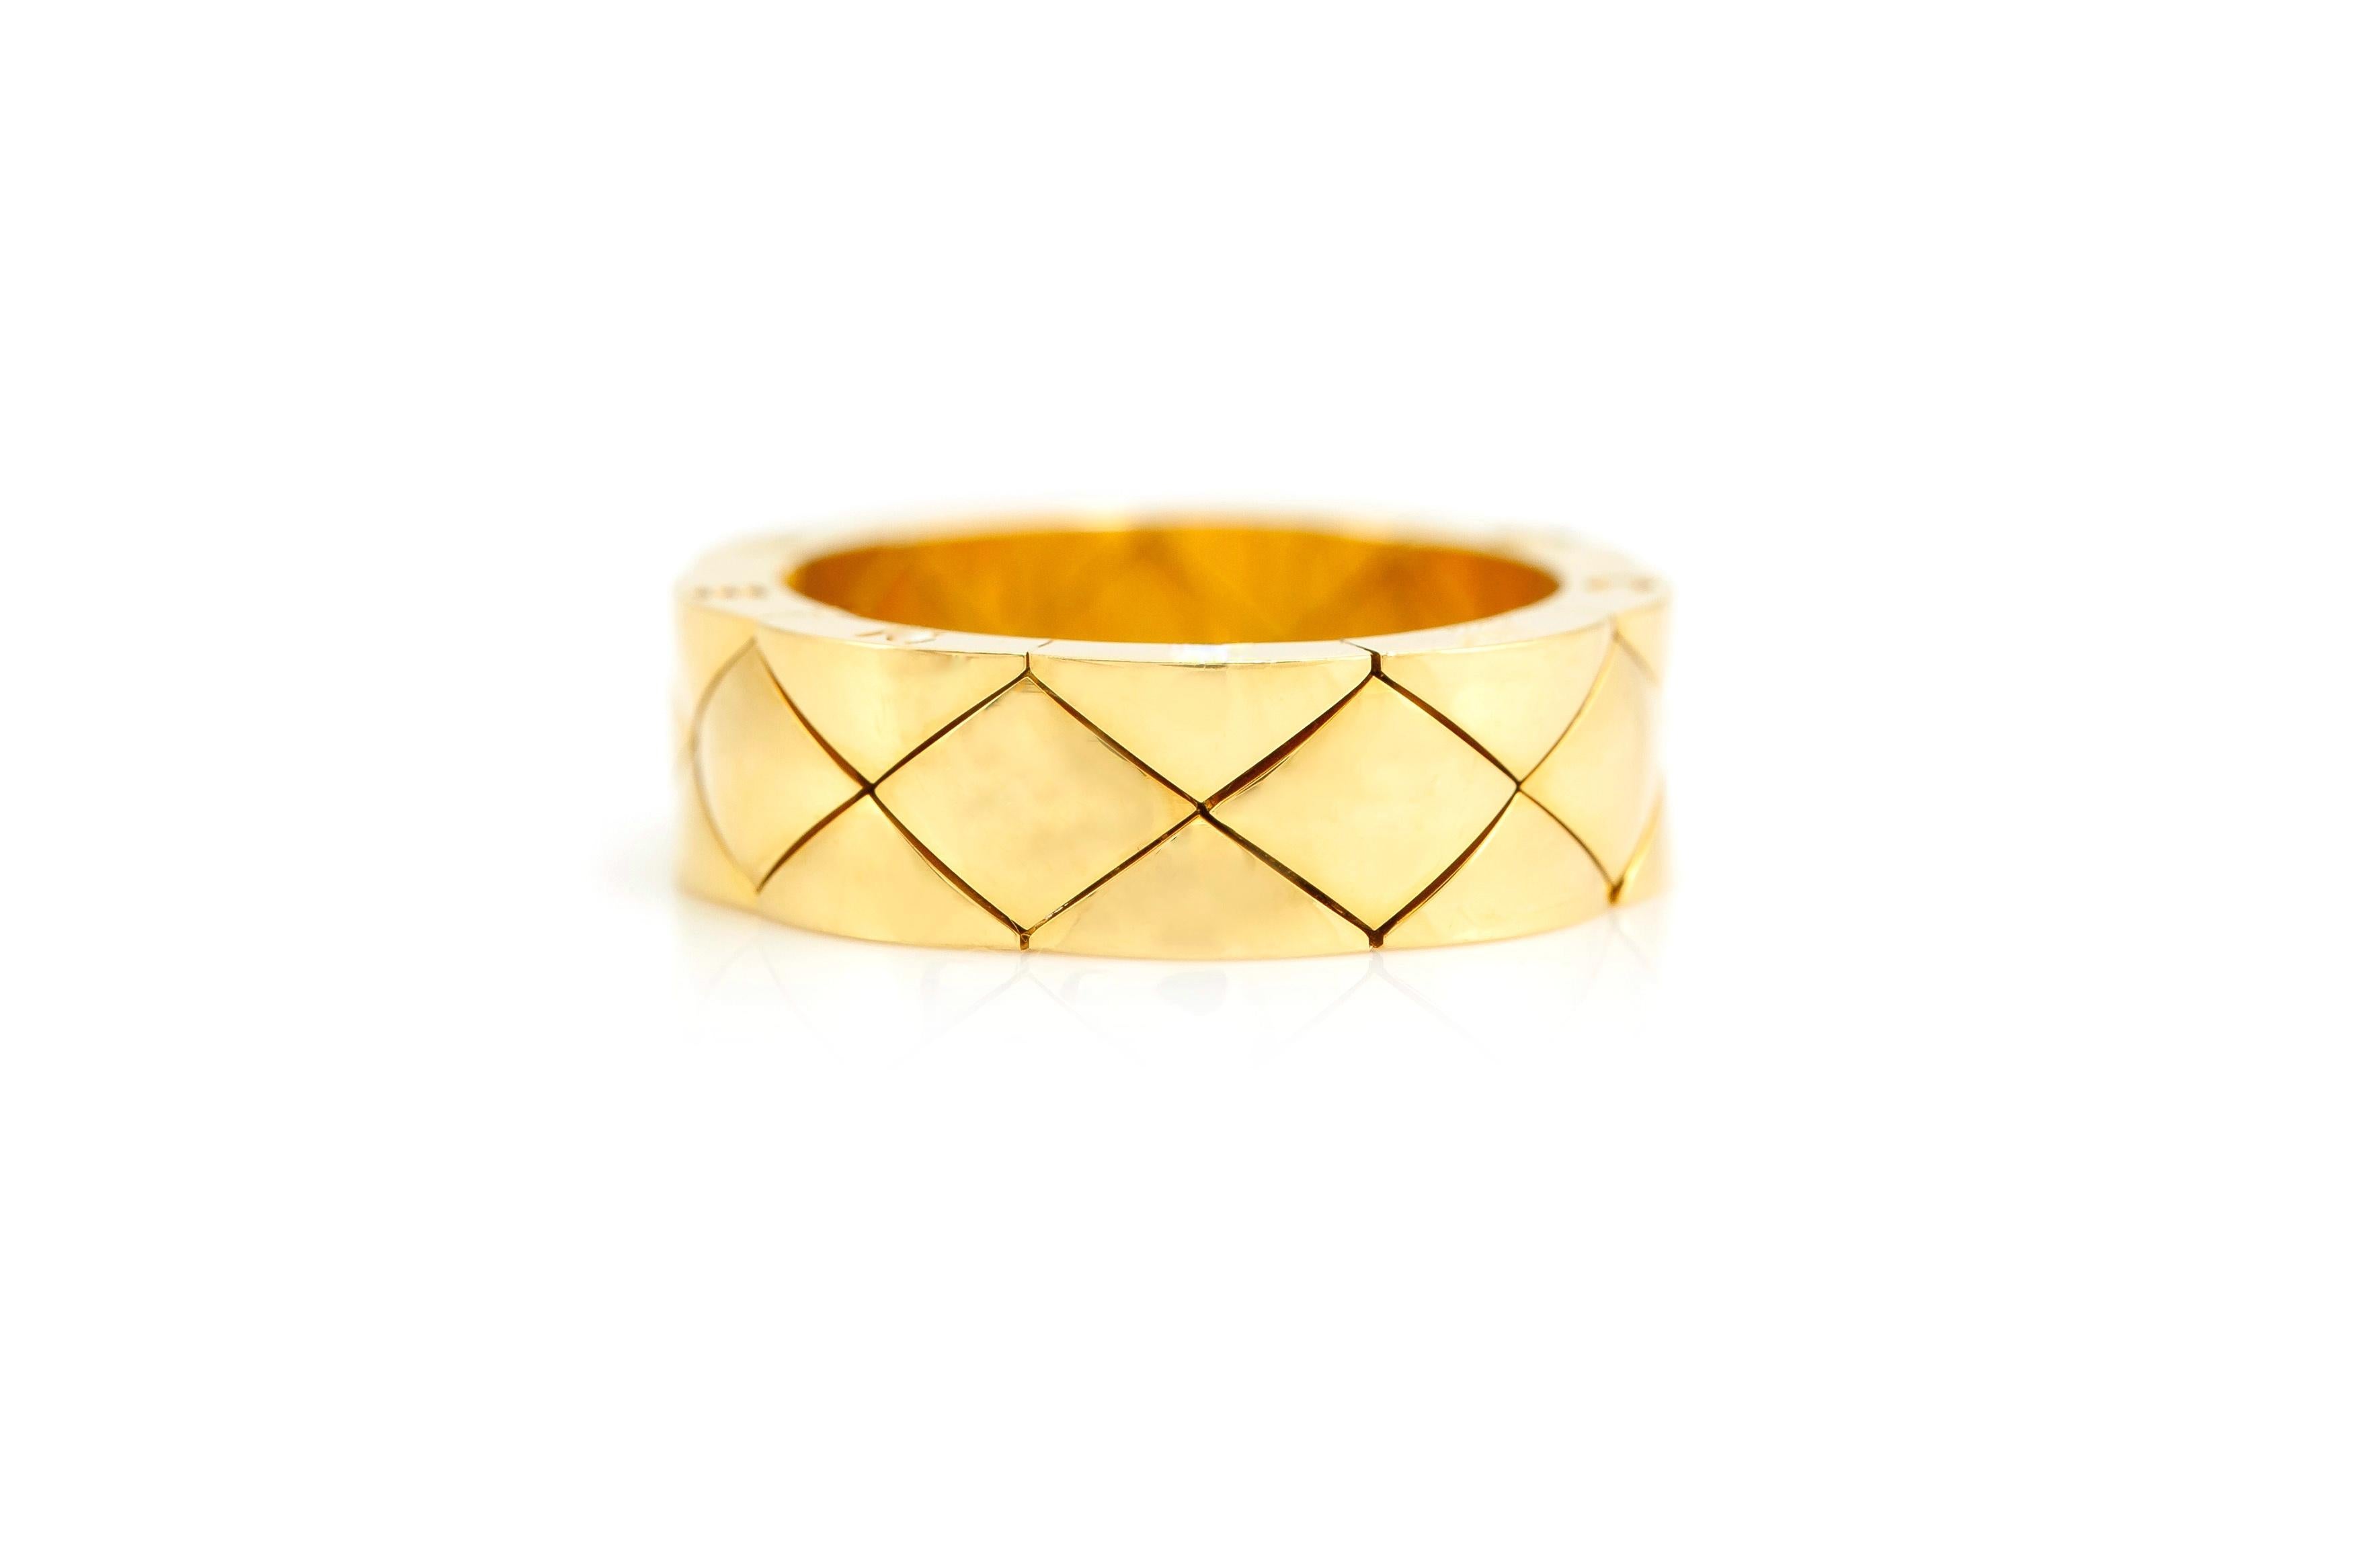 Finely crafted in 18k yellow gold.
Signed by Chanel
Size 8 3/4, 7.05mm wide